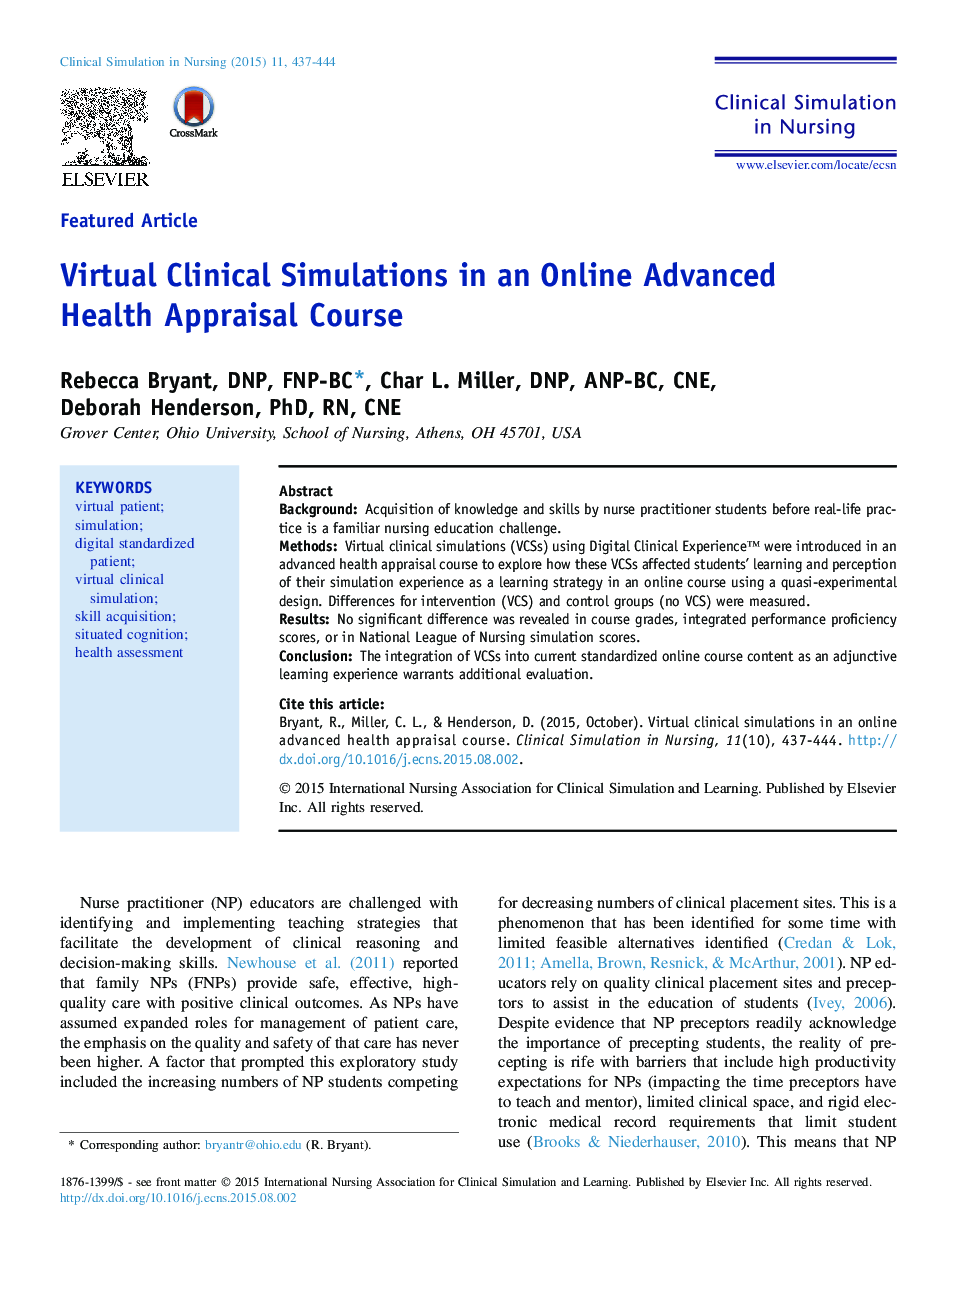 Virtual Clinical Simulations in an Online Advanced Health Appraisal Course